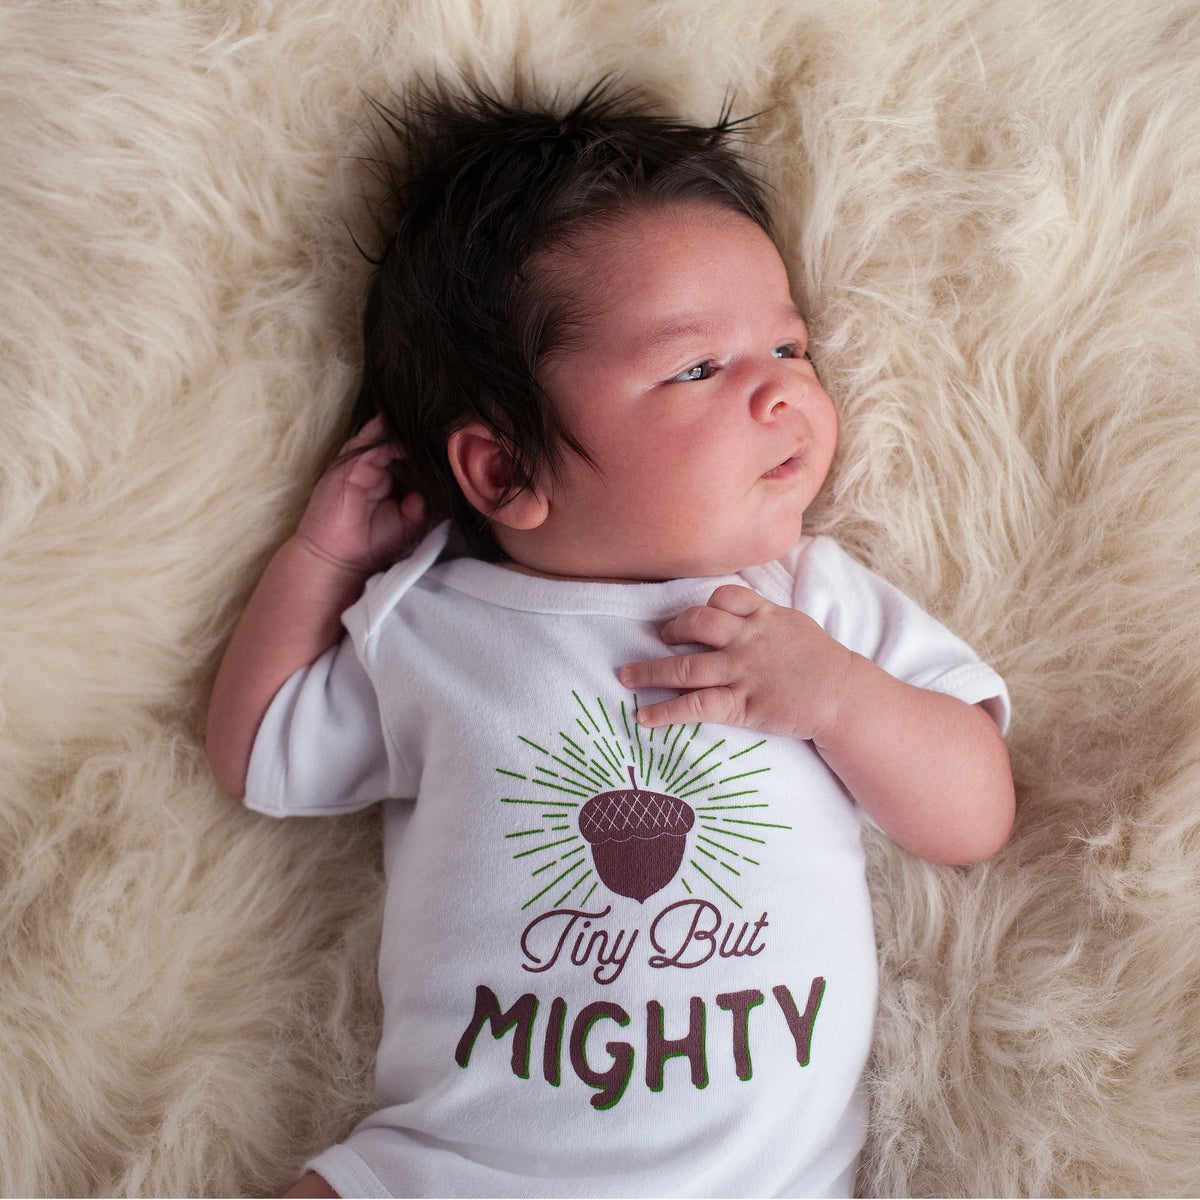 Tiny But Mighty Baby Bodysuit - Sweetpea and Co.